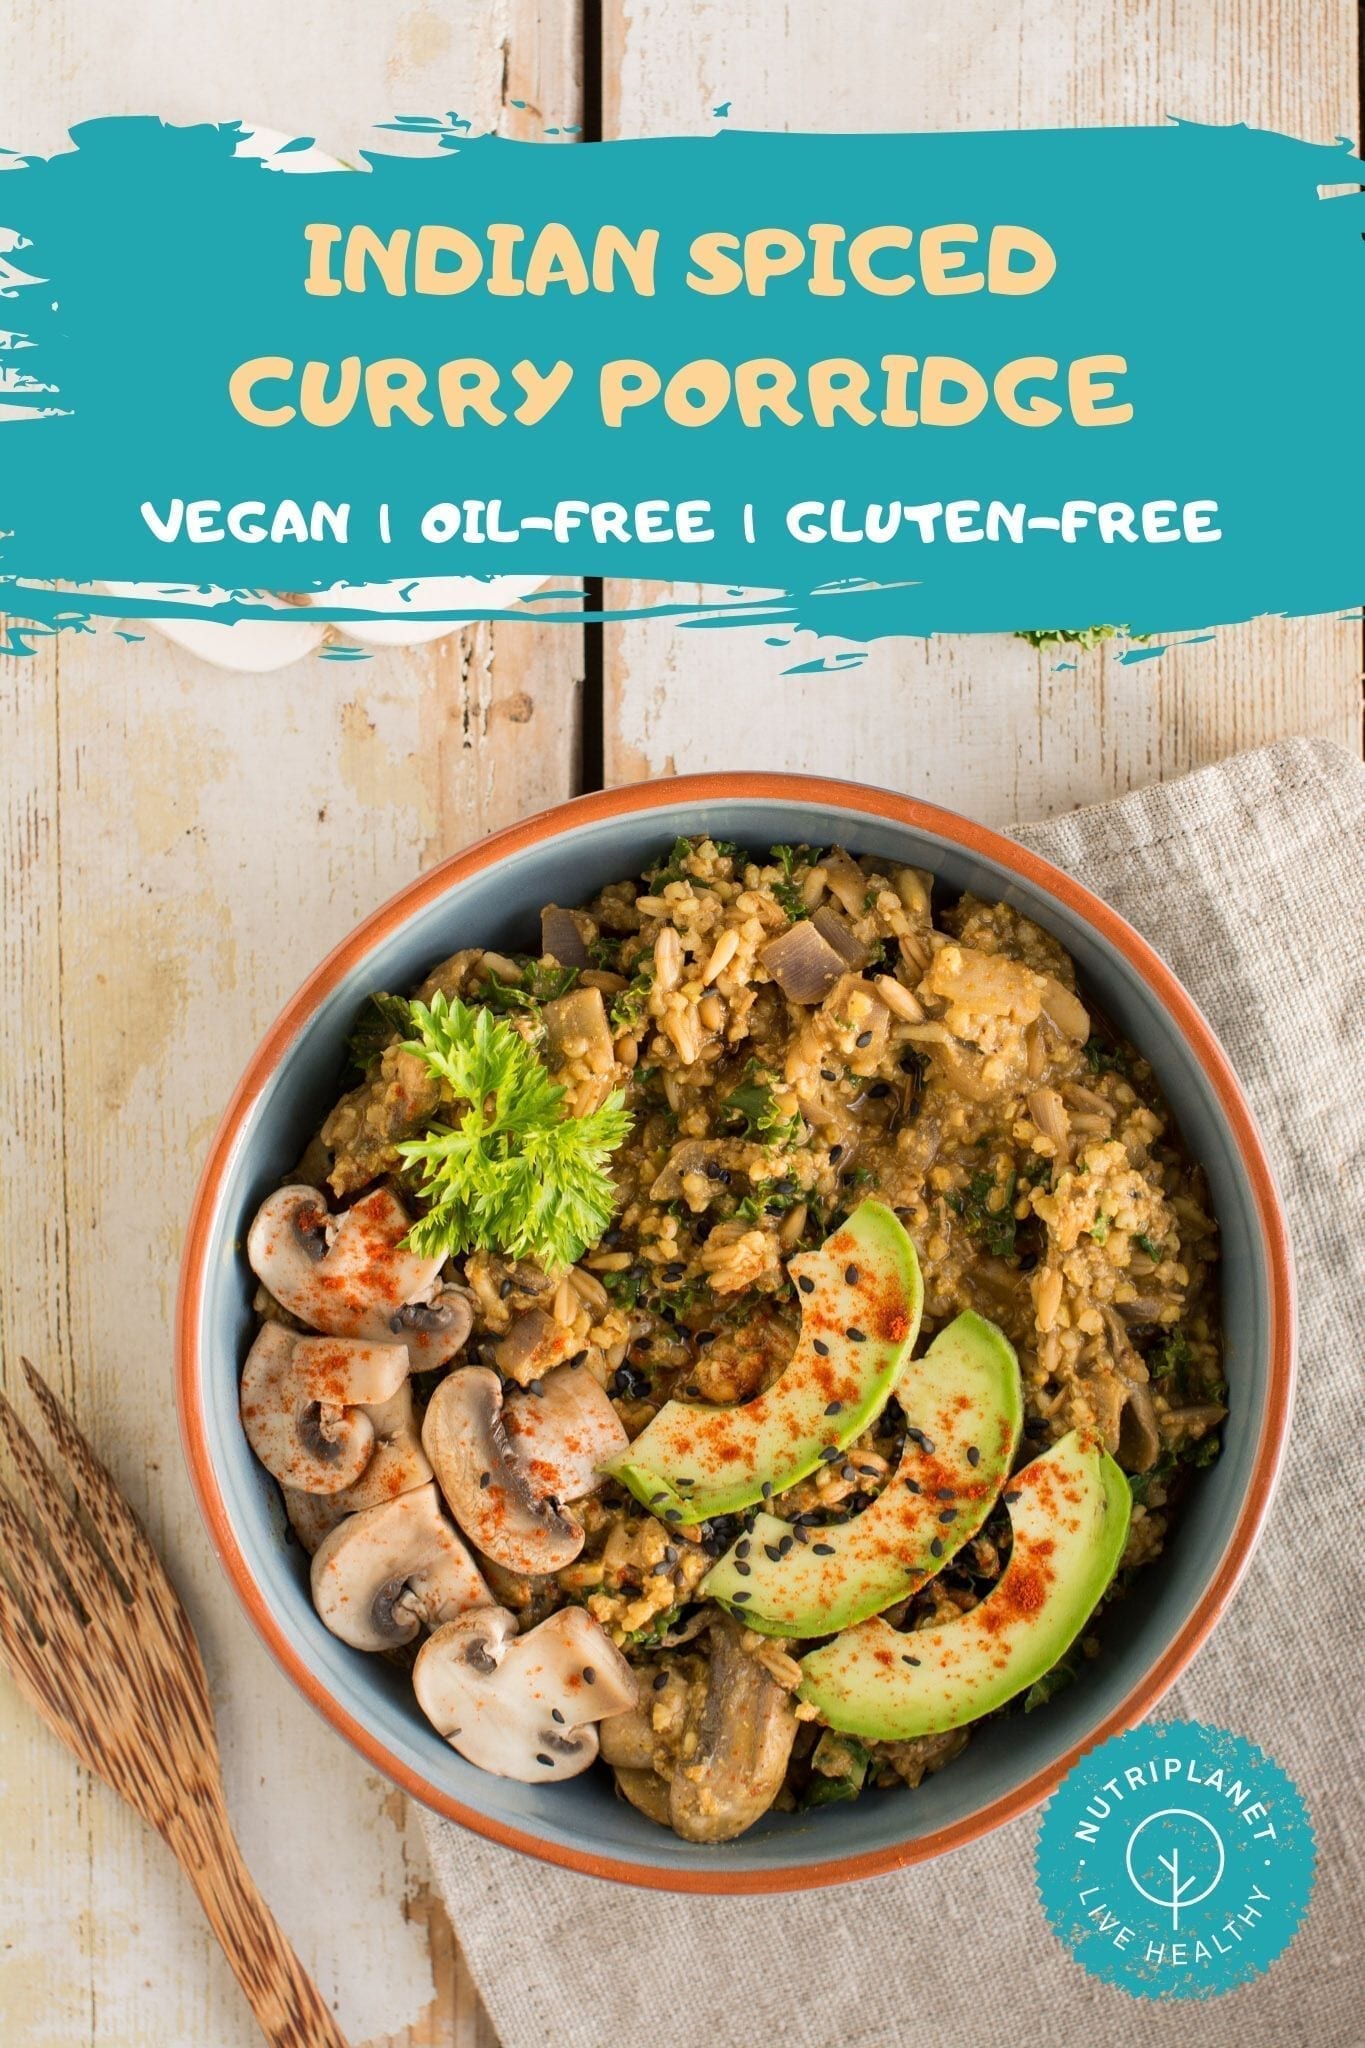 This multigrain Indian spiced curry porridge is full of fibre and nutrients your body needs to start off the day right. 